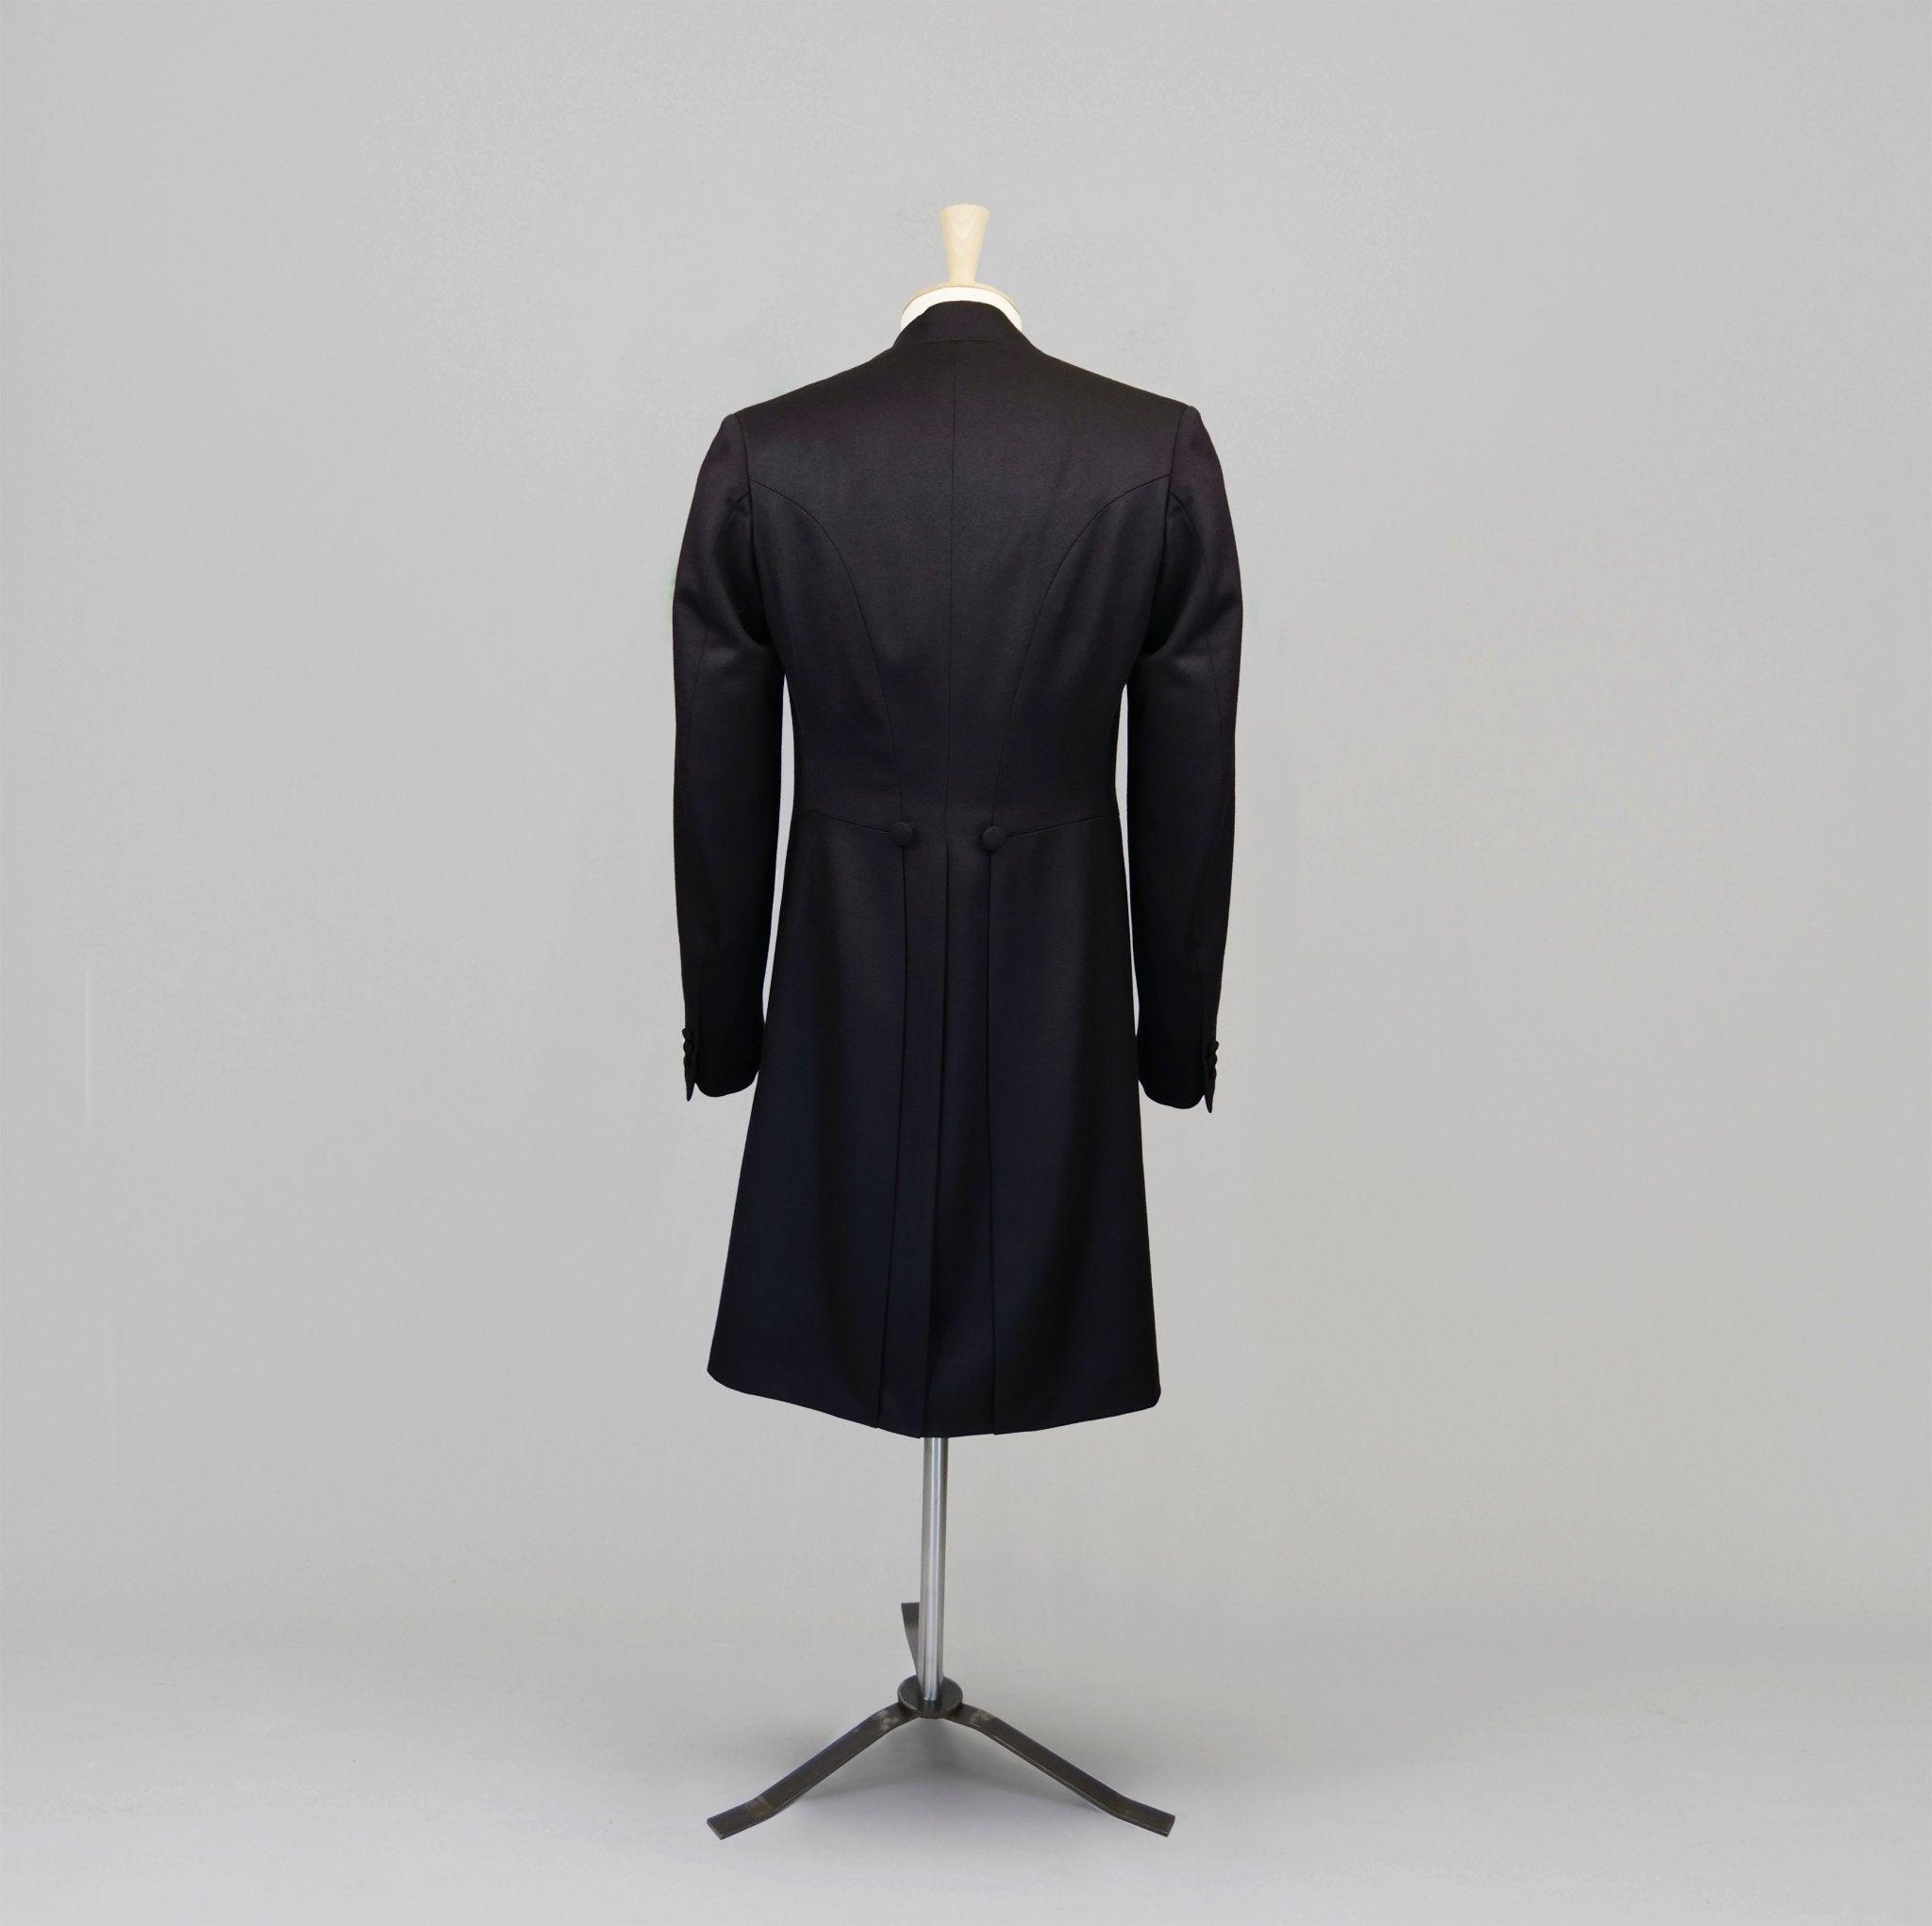 An Early Denim Coat from the FIDM Museum Collection  FIDM Museum